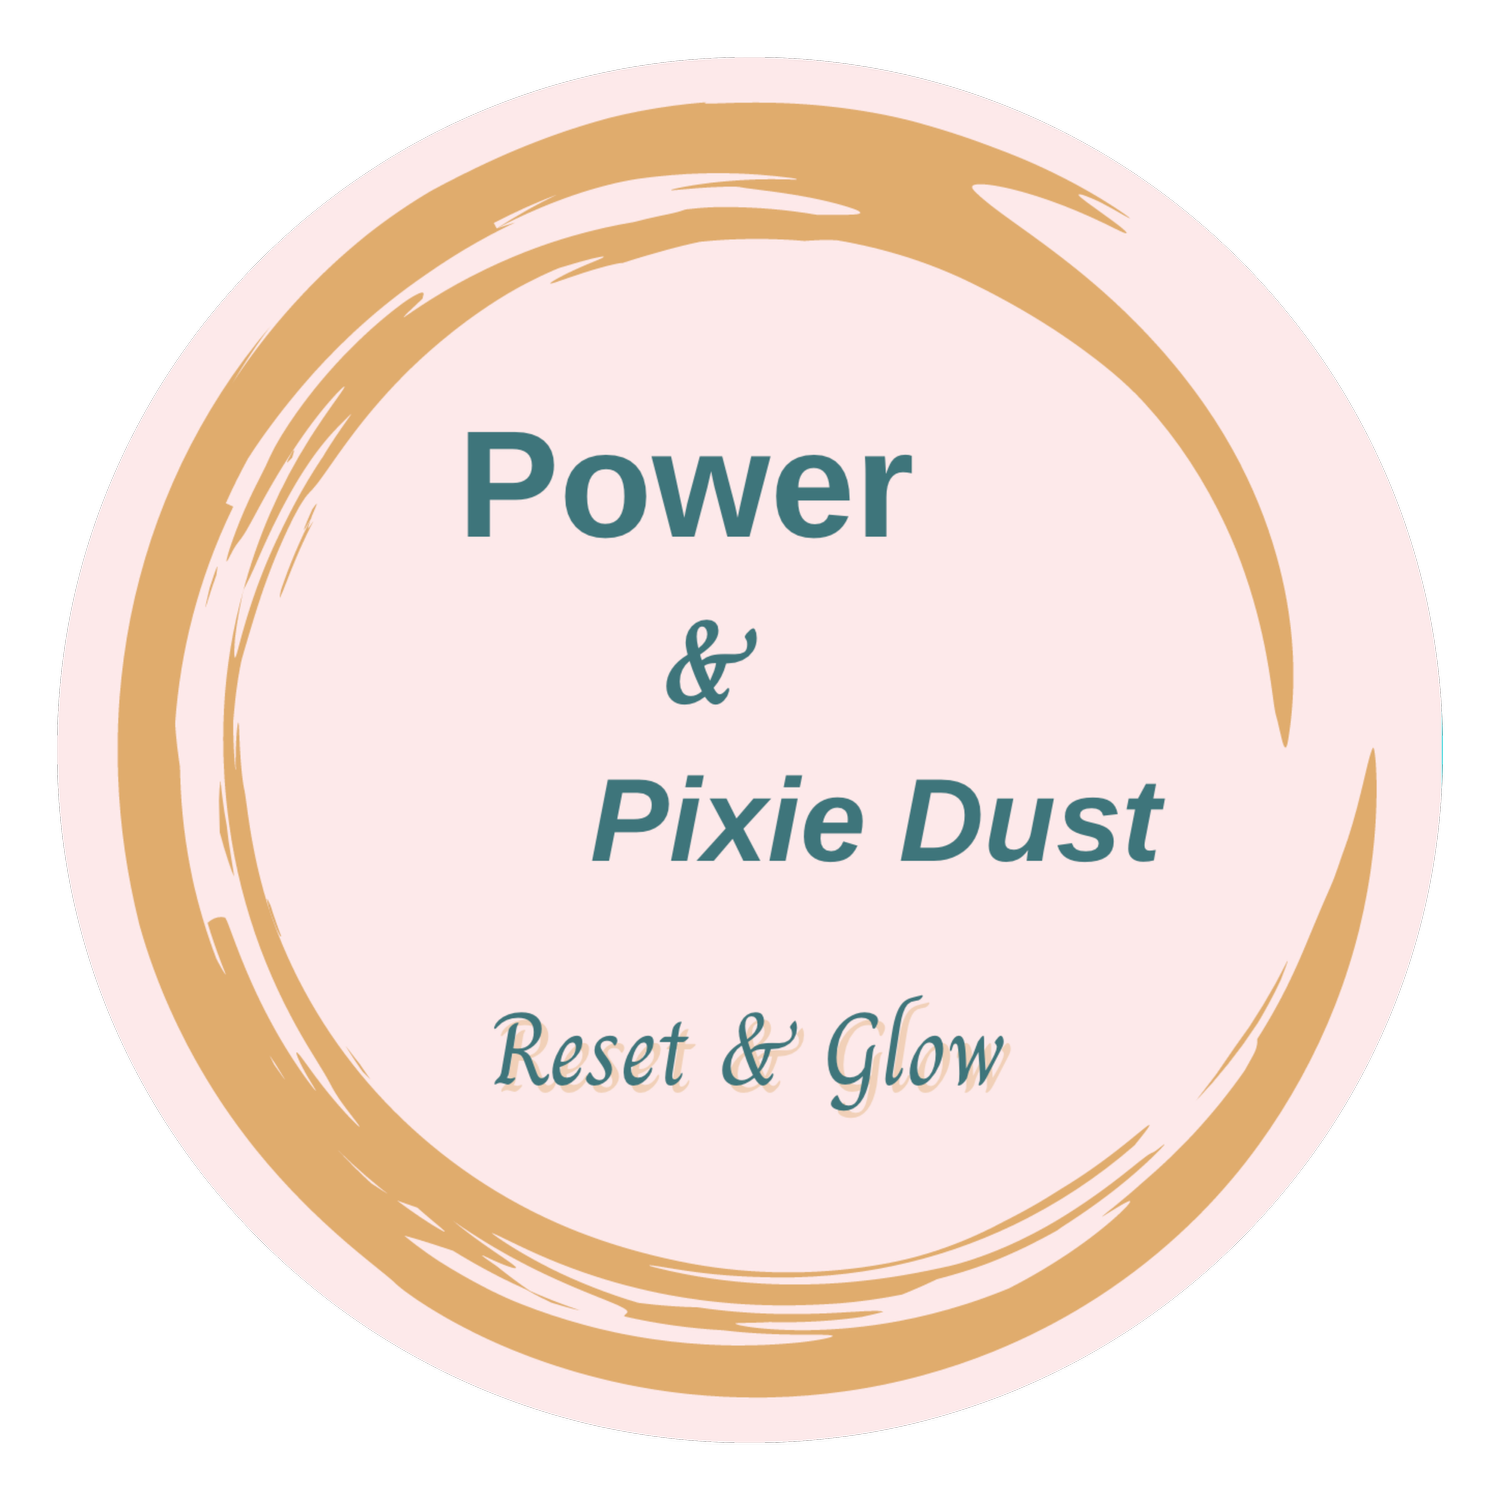 Power and Pixie Dust